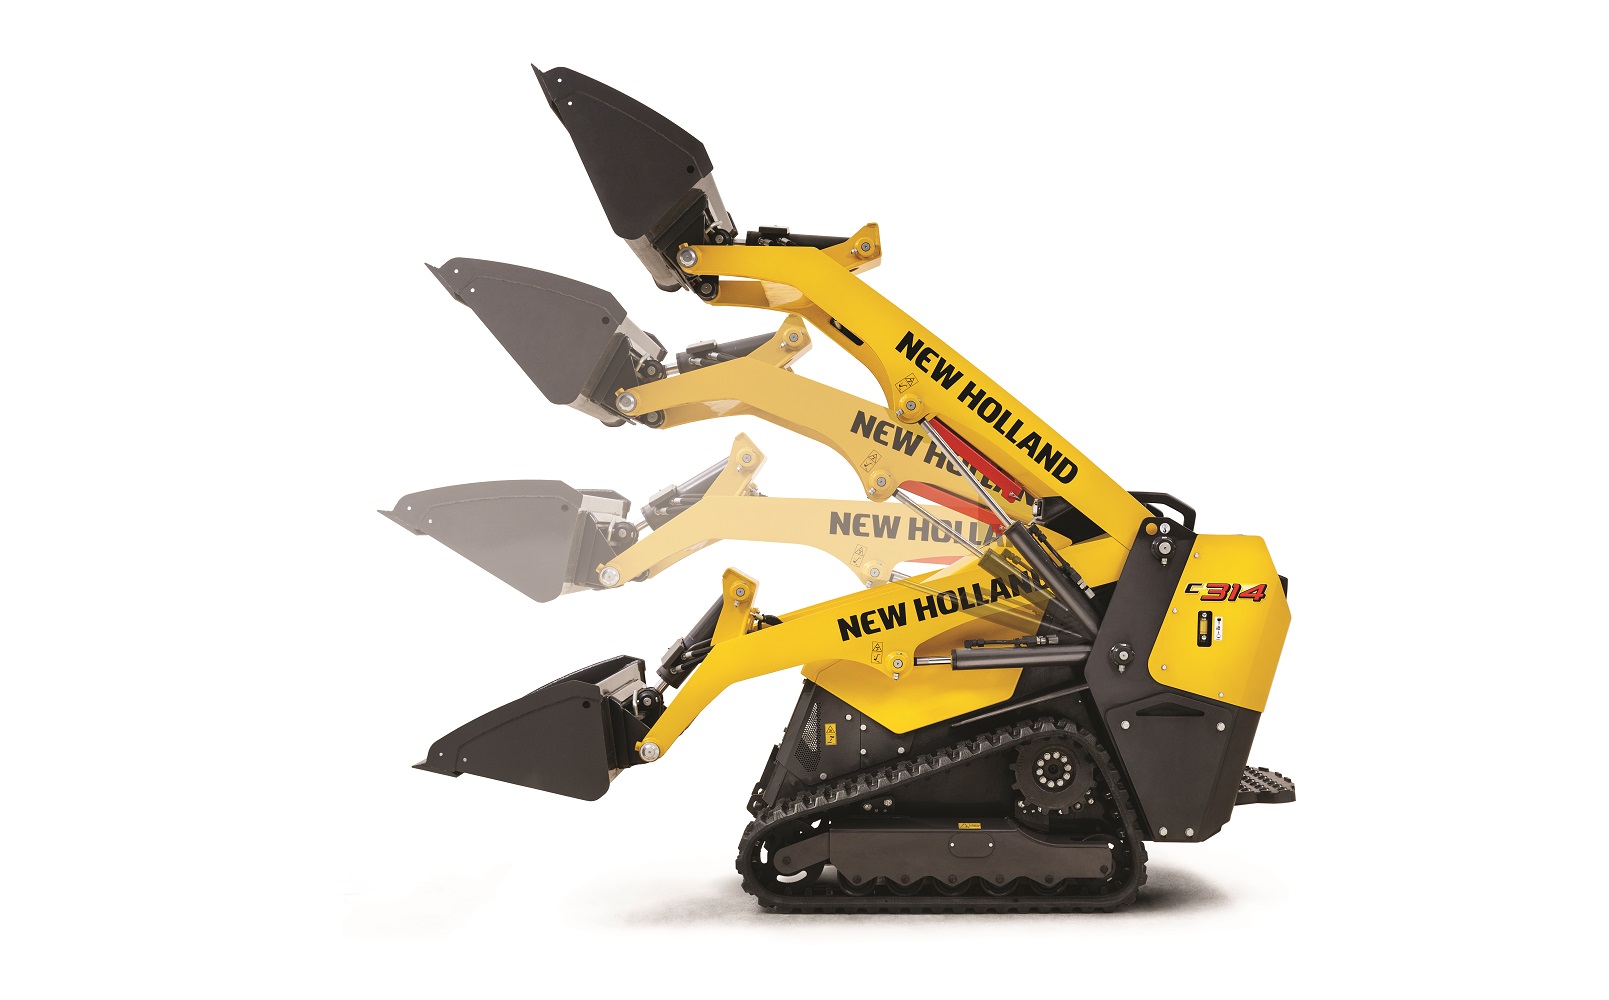 New Holland Construction C314 Mini Track Loader Now Available in North America